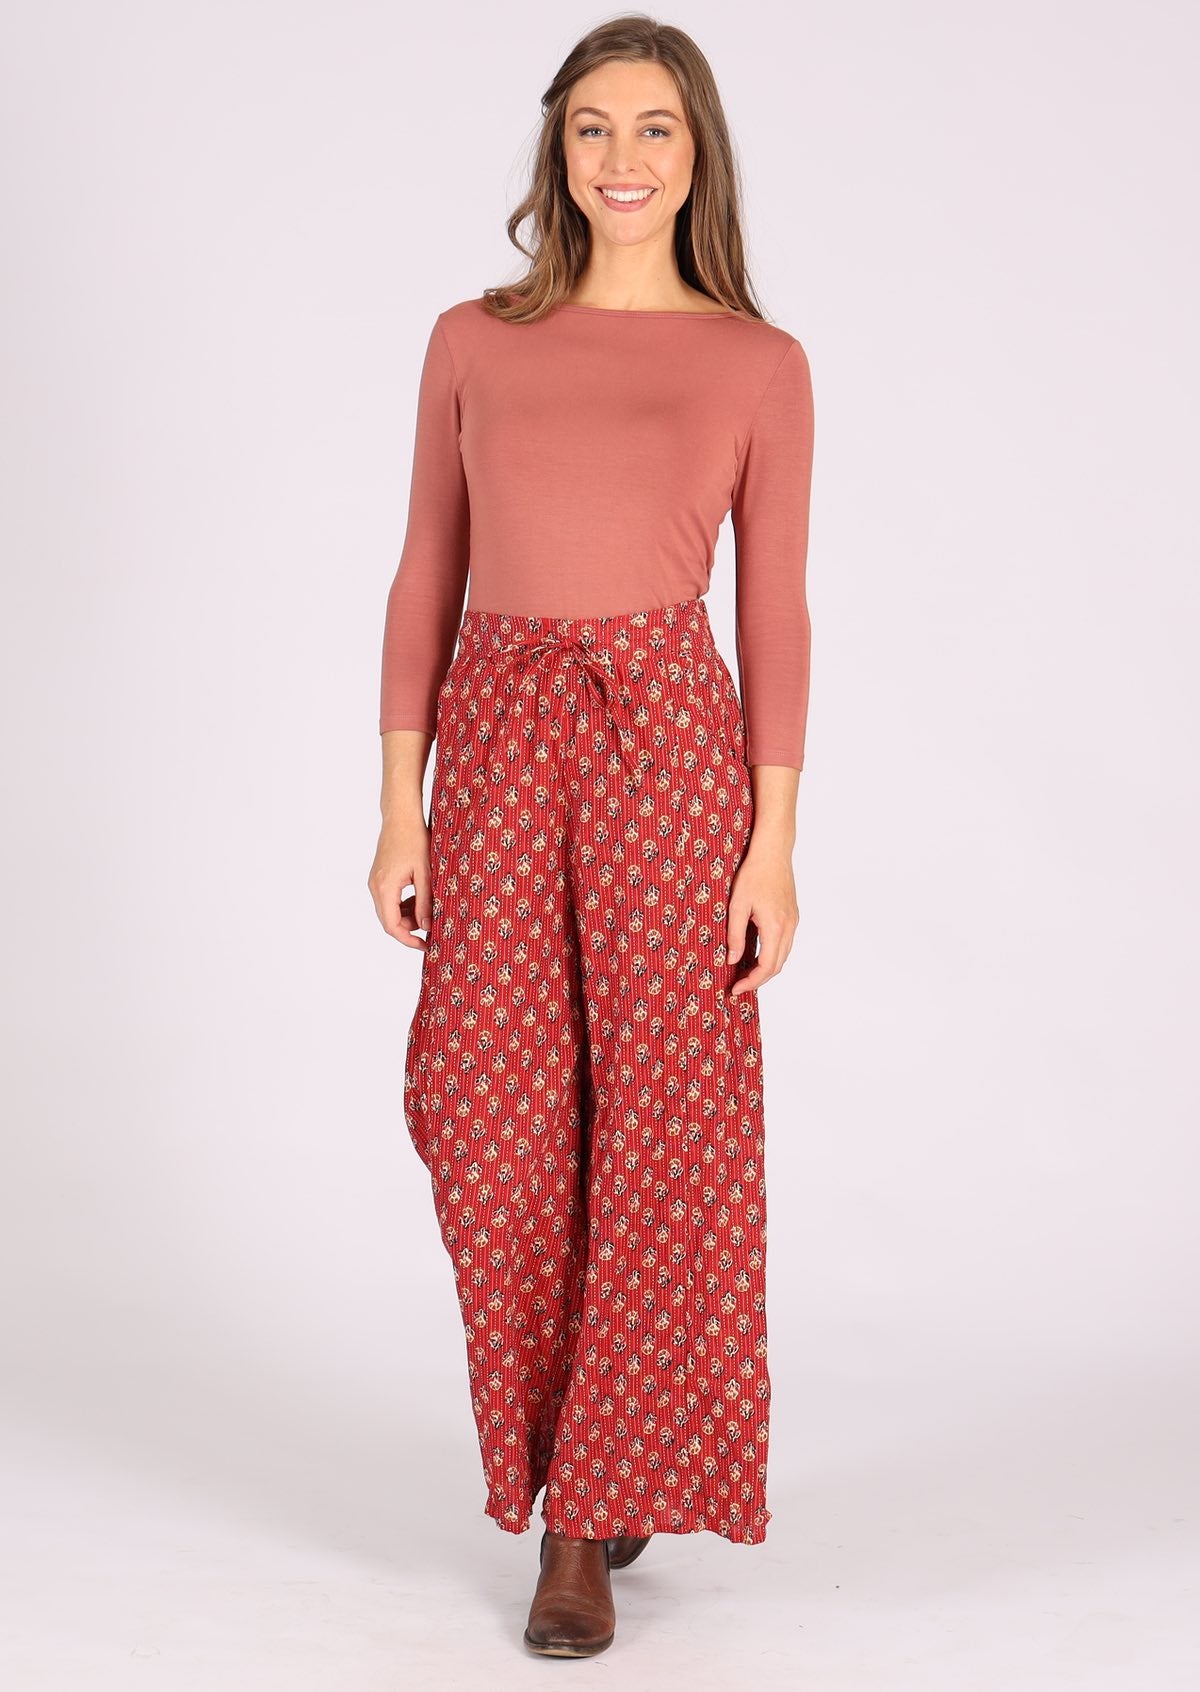 Lightweight cotton pants with sweet flower print on burnt red base